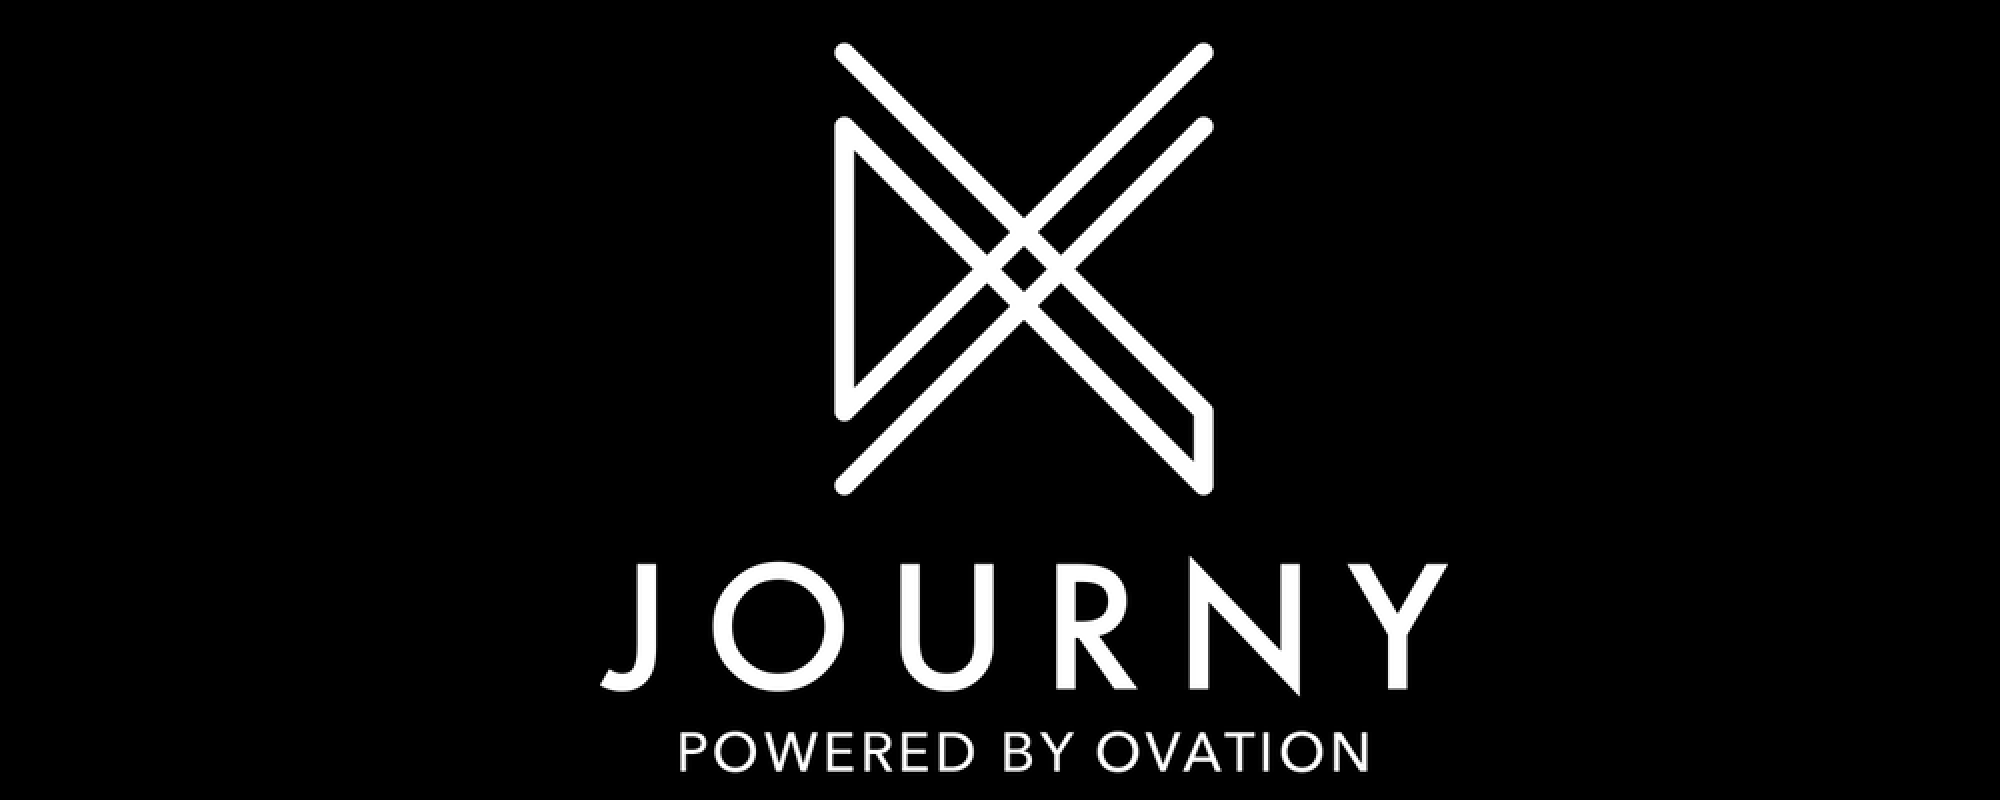 JOURNY LAUNCHES ON DTS AUTOSTAGE VIDEO SERVICE POWERED BY TIVO